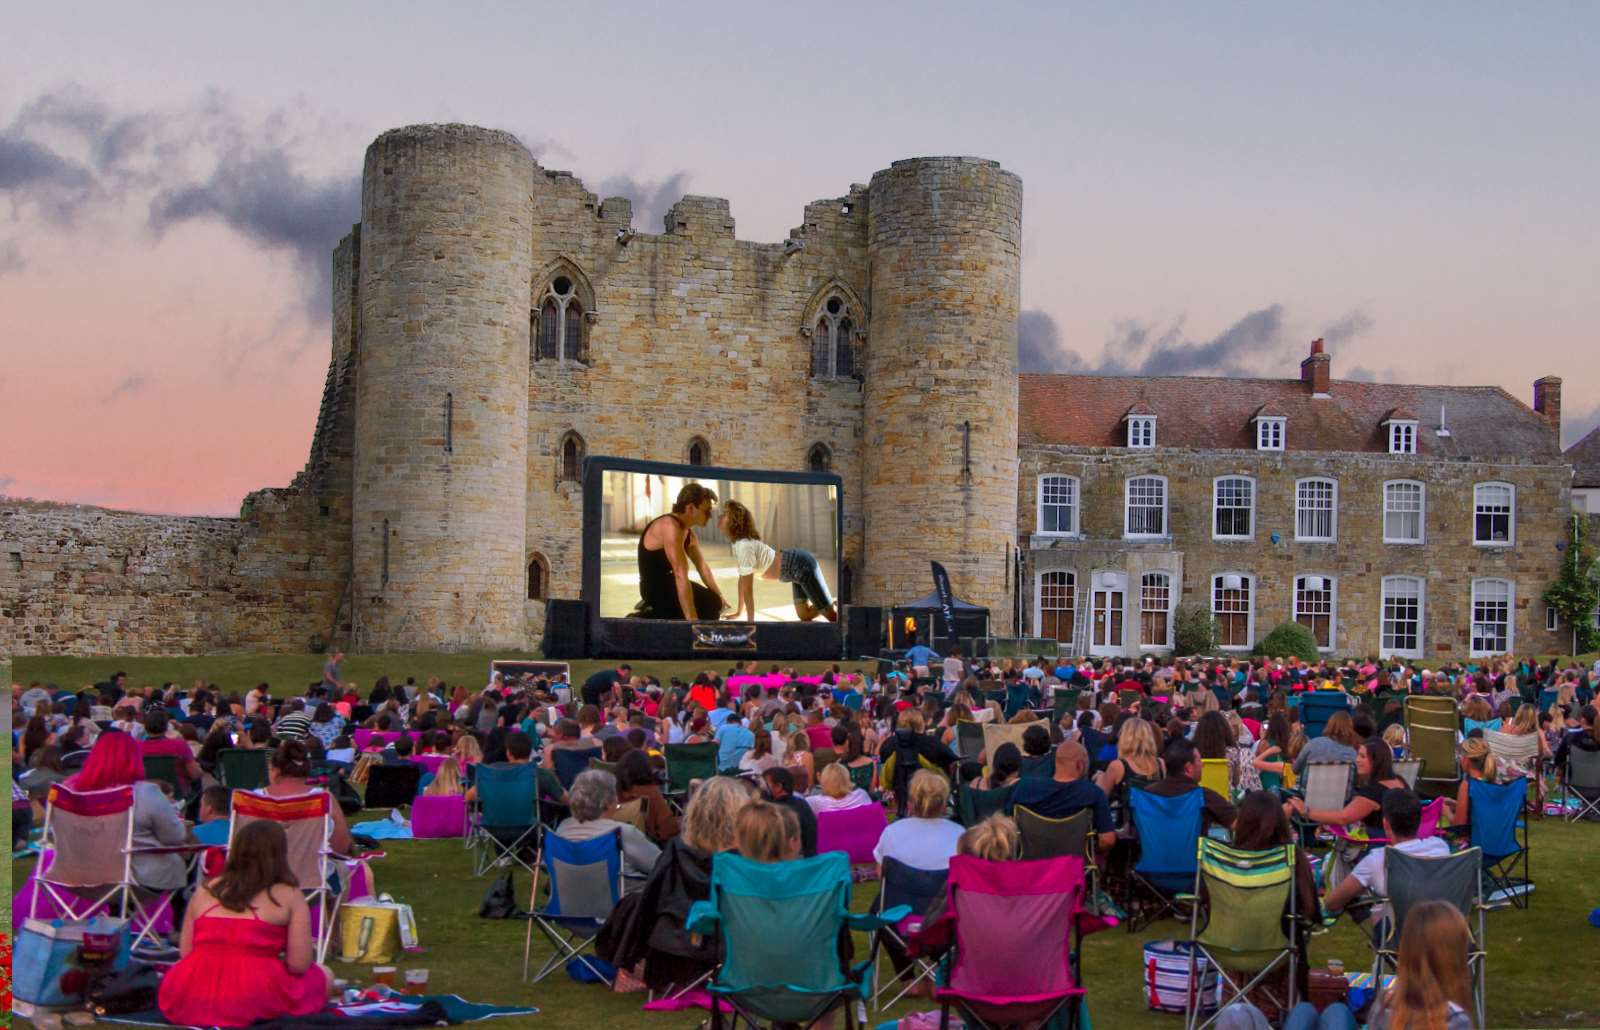 The Luna cinema screenings will come to castles and parks across kent including Tonbridge Castle